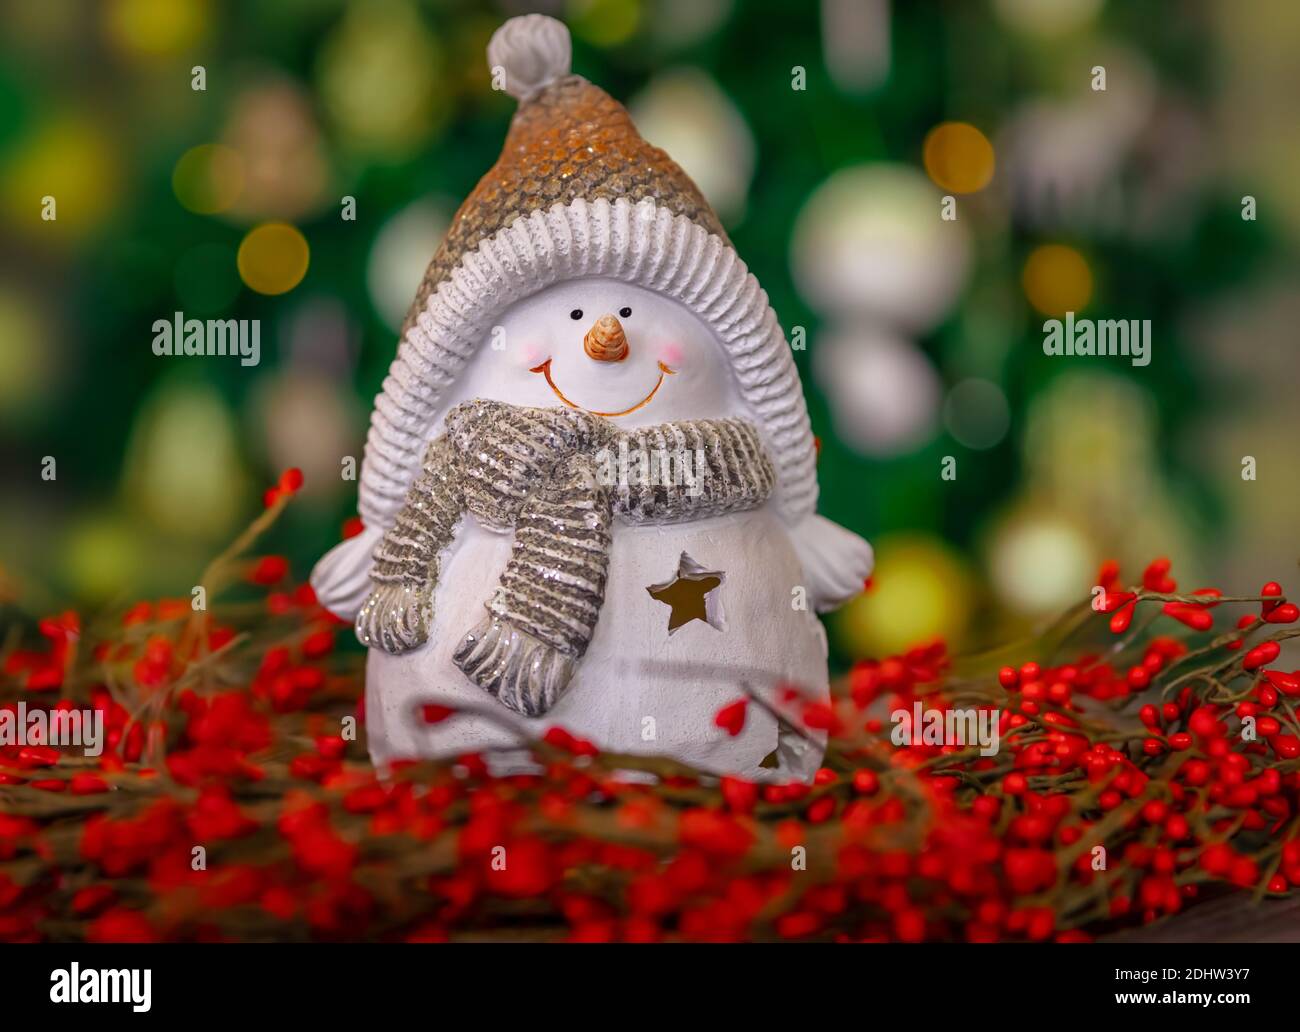 https://c8.alamy.com/comp/2DHW3Y7/beautiful-christmas-home-decoration-cute-little-snowman-toy-standing-in-the-red-berries-wreath-on-the-table-over-glowing-xmas-tree-bokeh-lights-2DHW3Y7.jpg